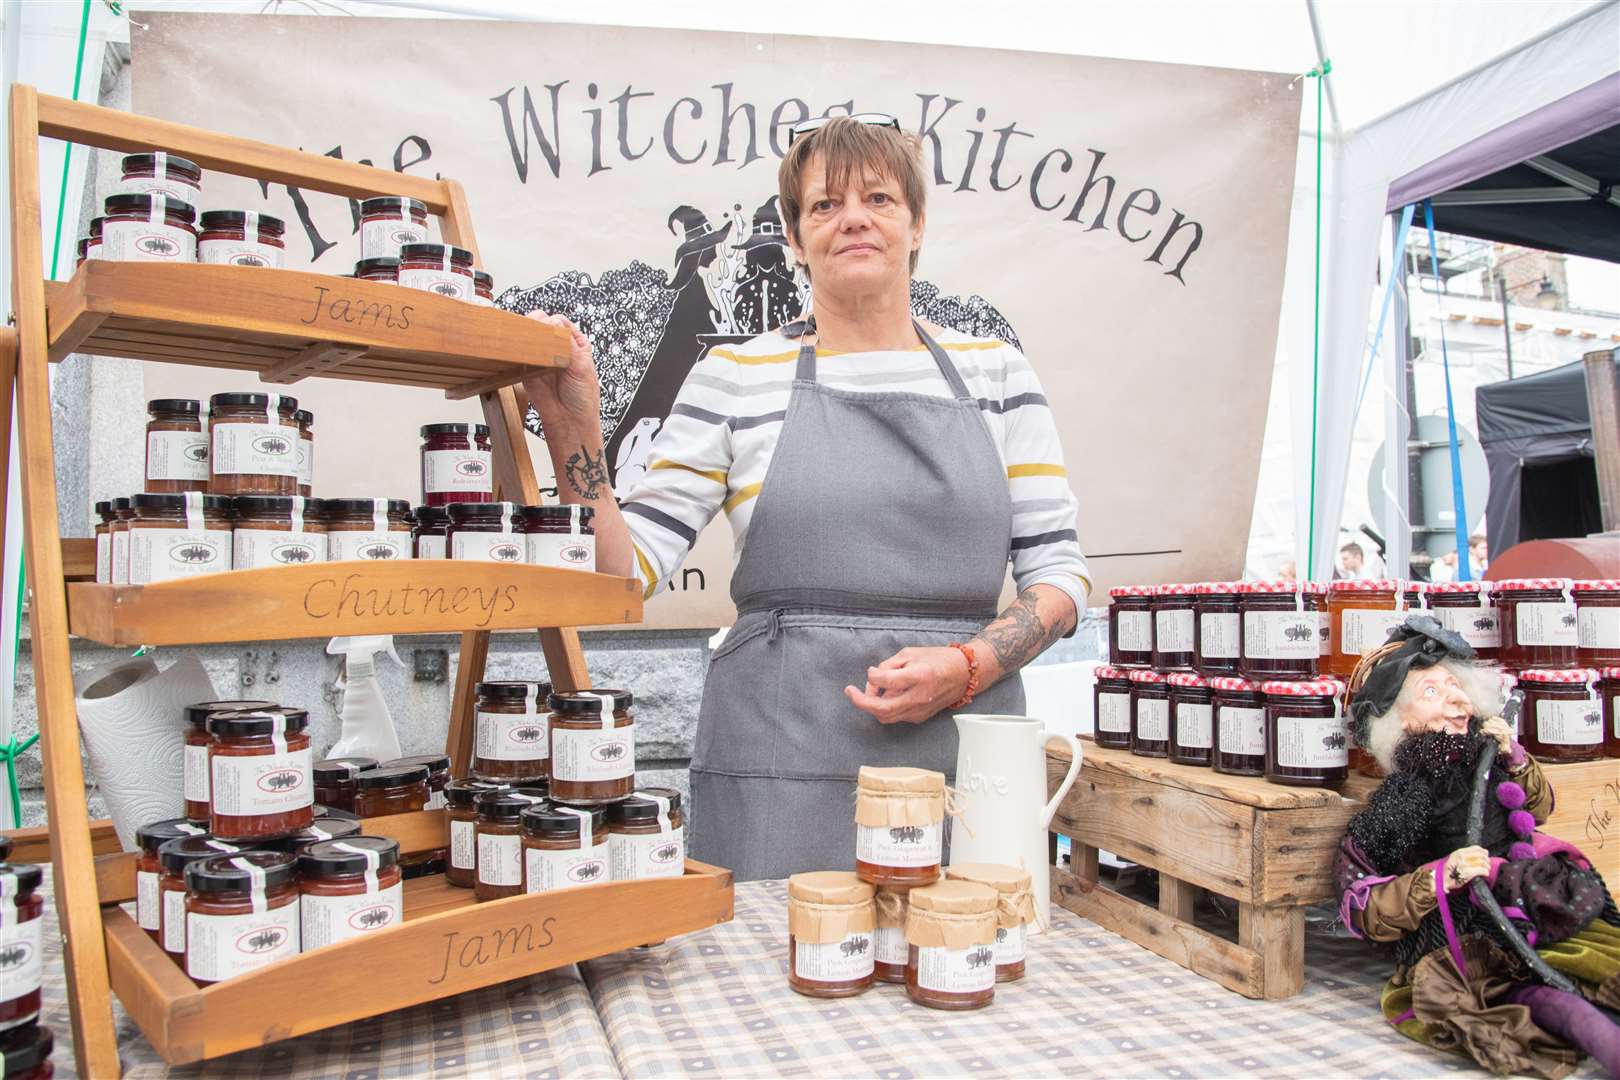 Tanya Muttitt of The Witches Kitchen. Picture: Daniel Forsyth